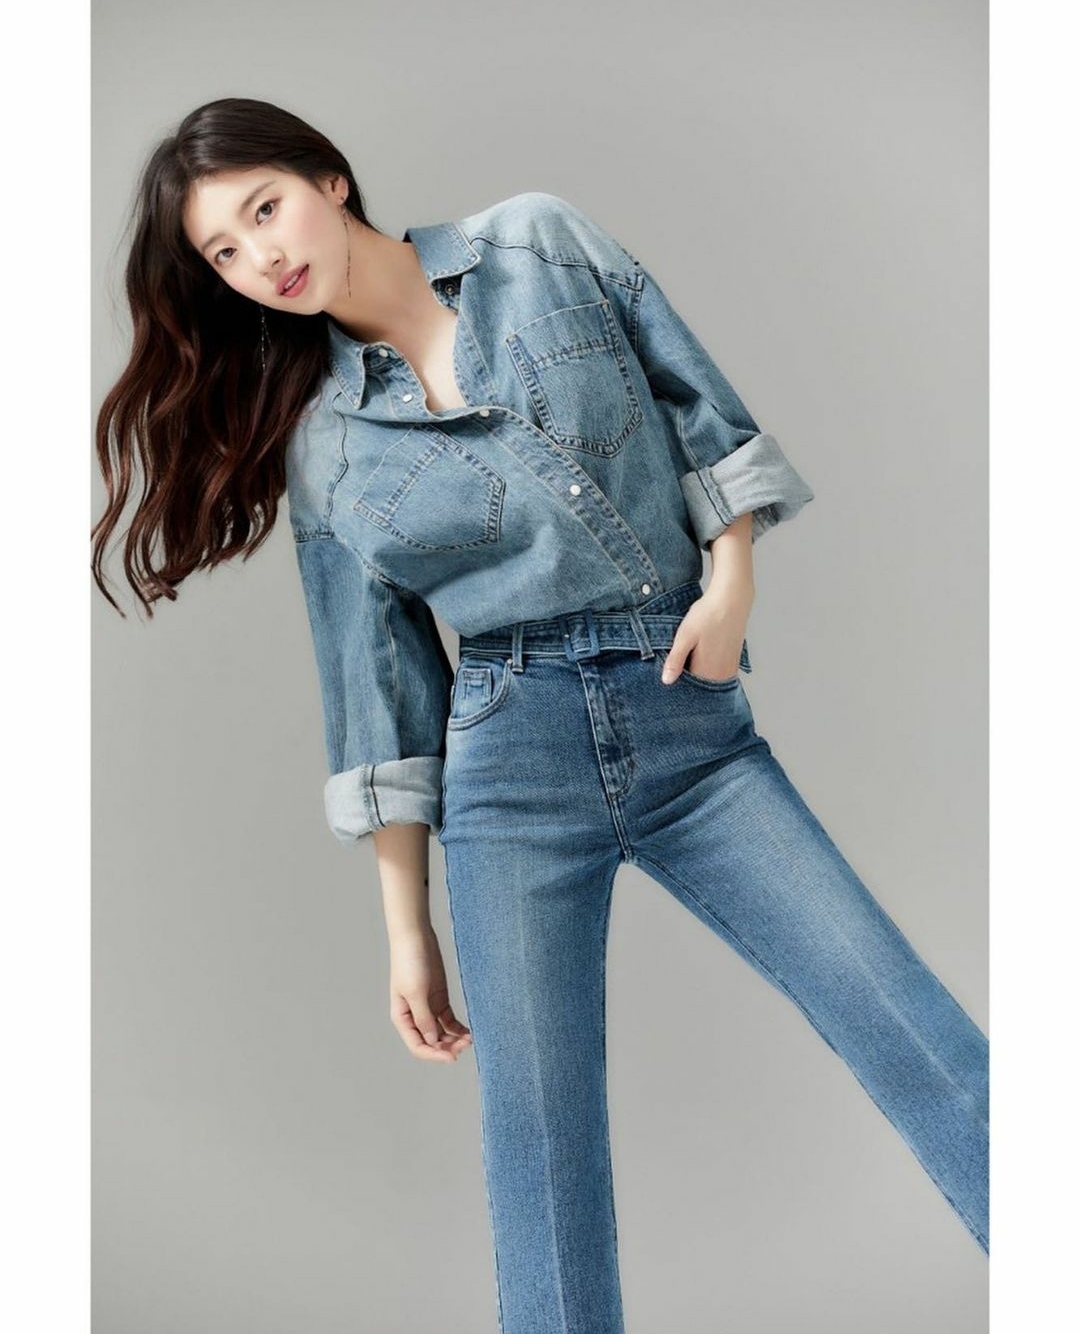 https://www.iwmbuzz.com/wp-content/uploads/2022/03/comfy-stylish-looks-by-bae-suzy-have-a-look.jpg